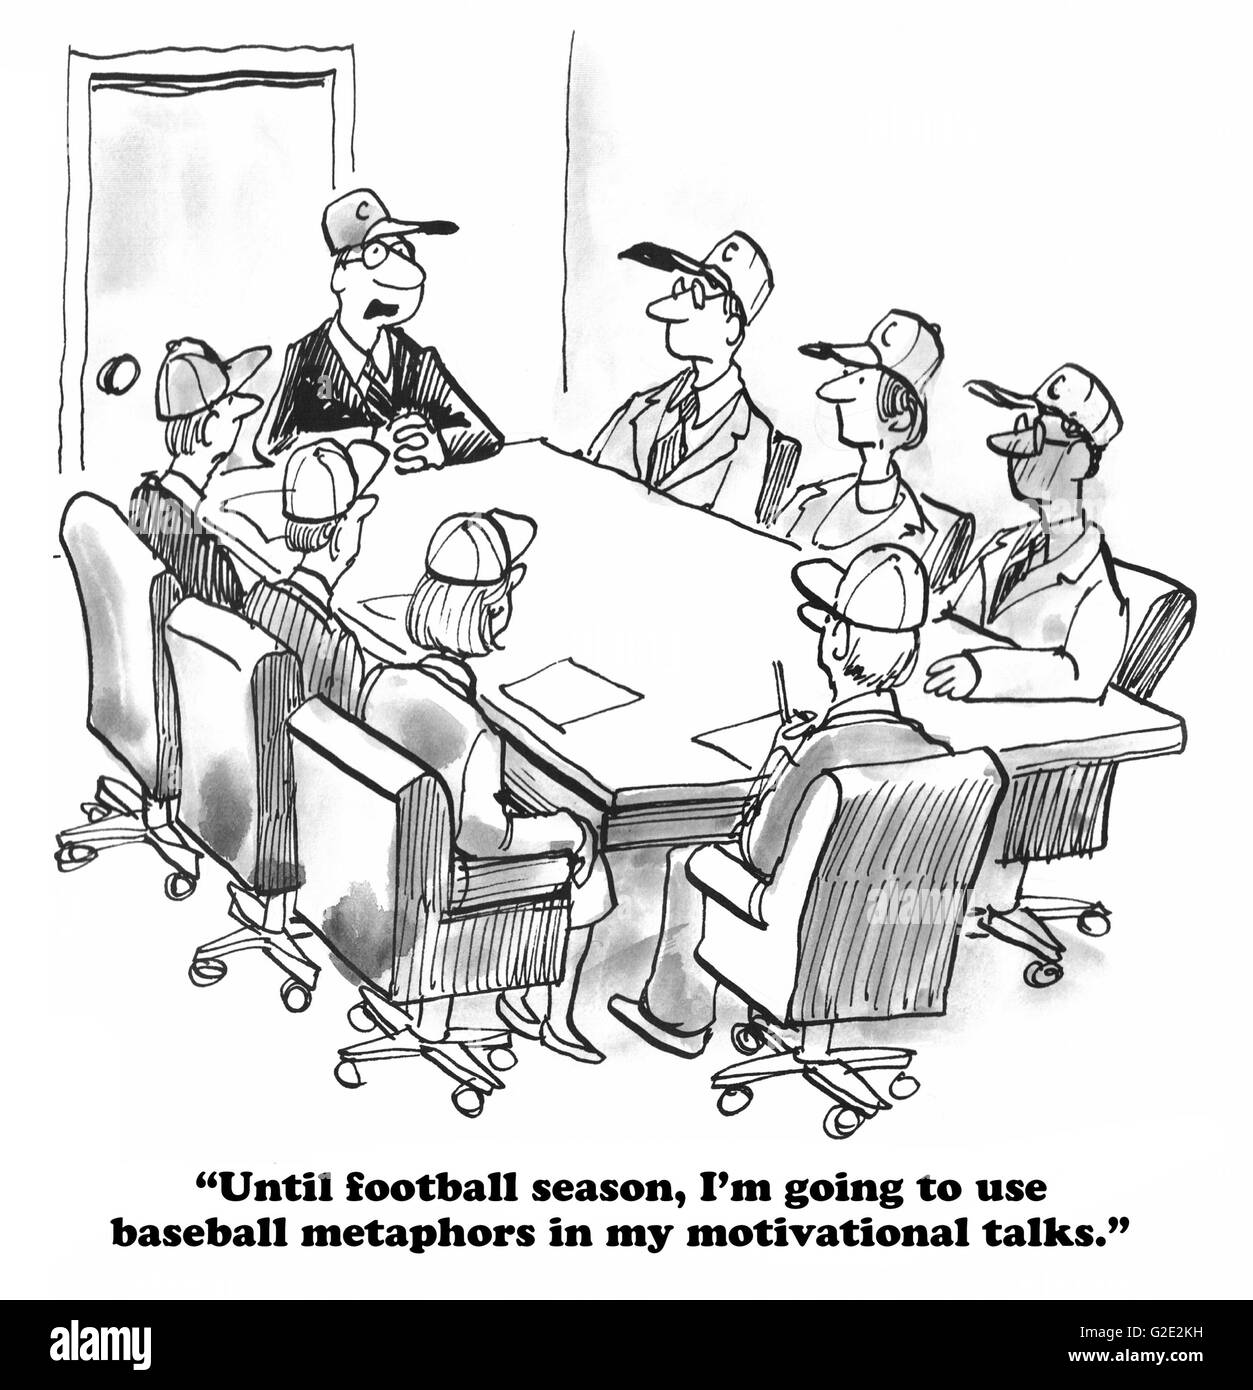 Business cartoon about sports metaphors for motivation. Stock Photo